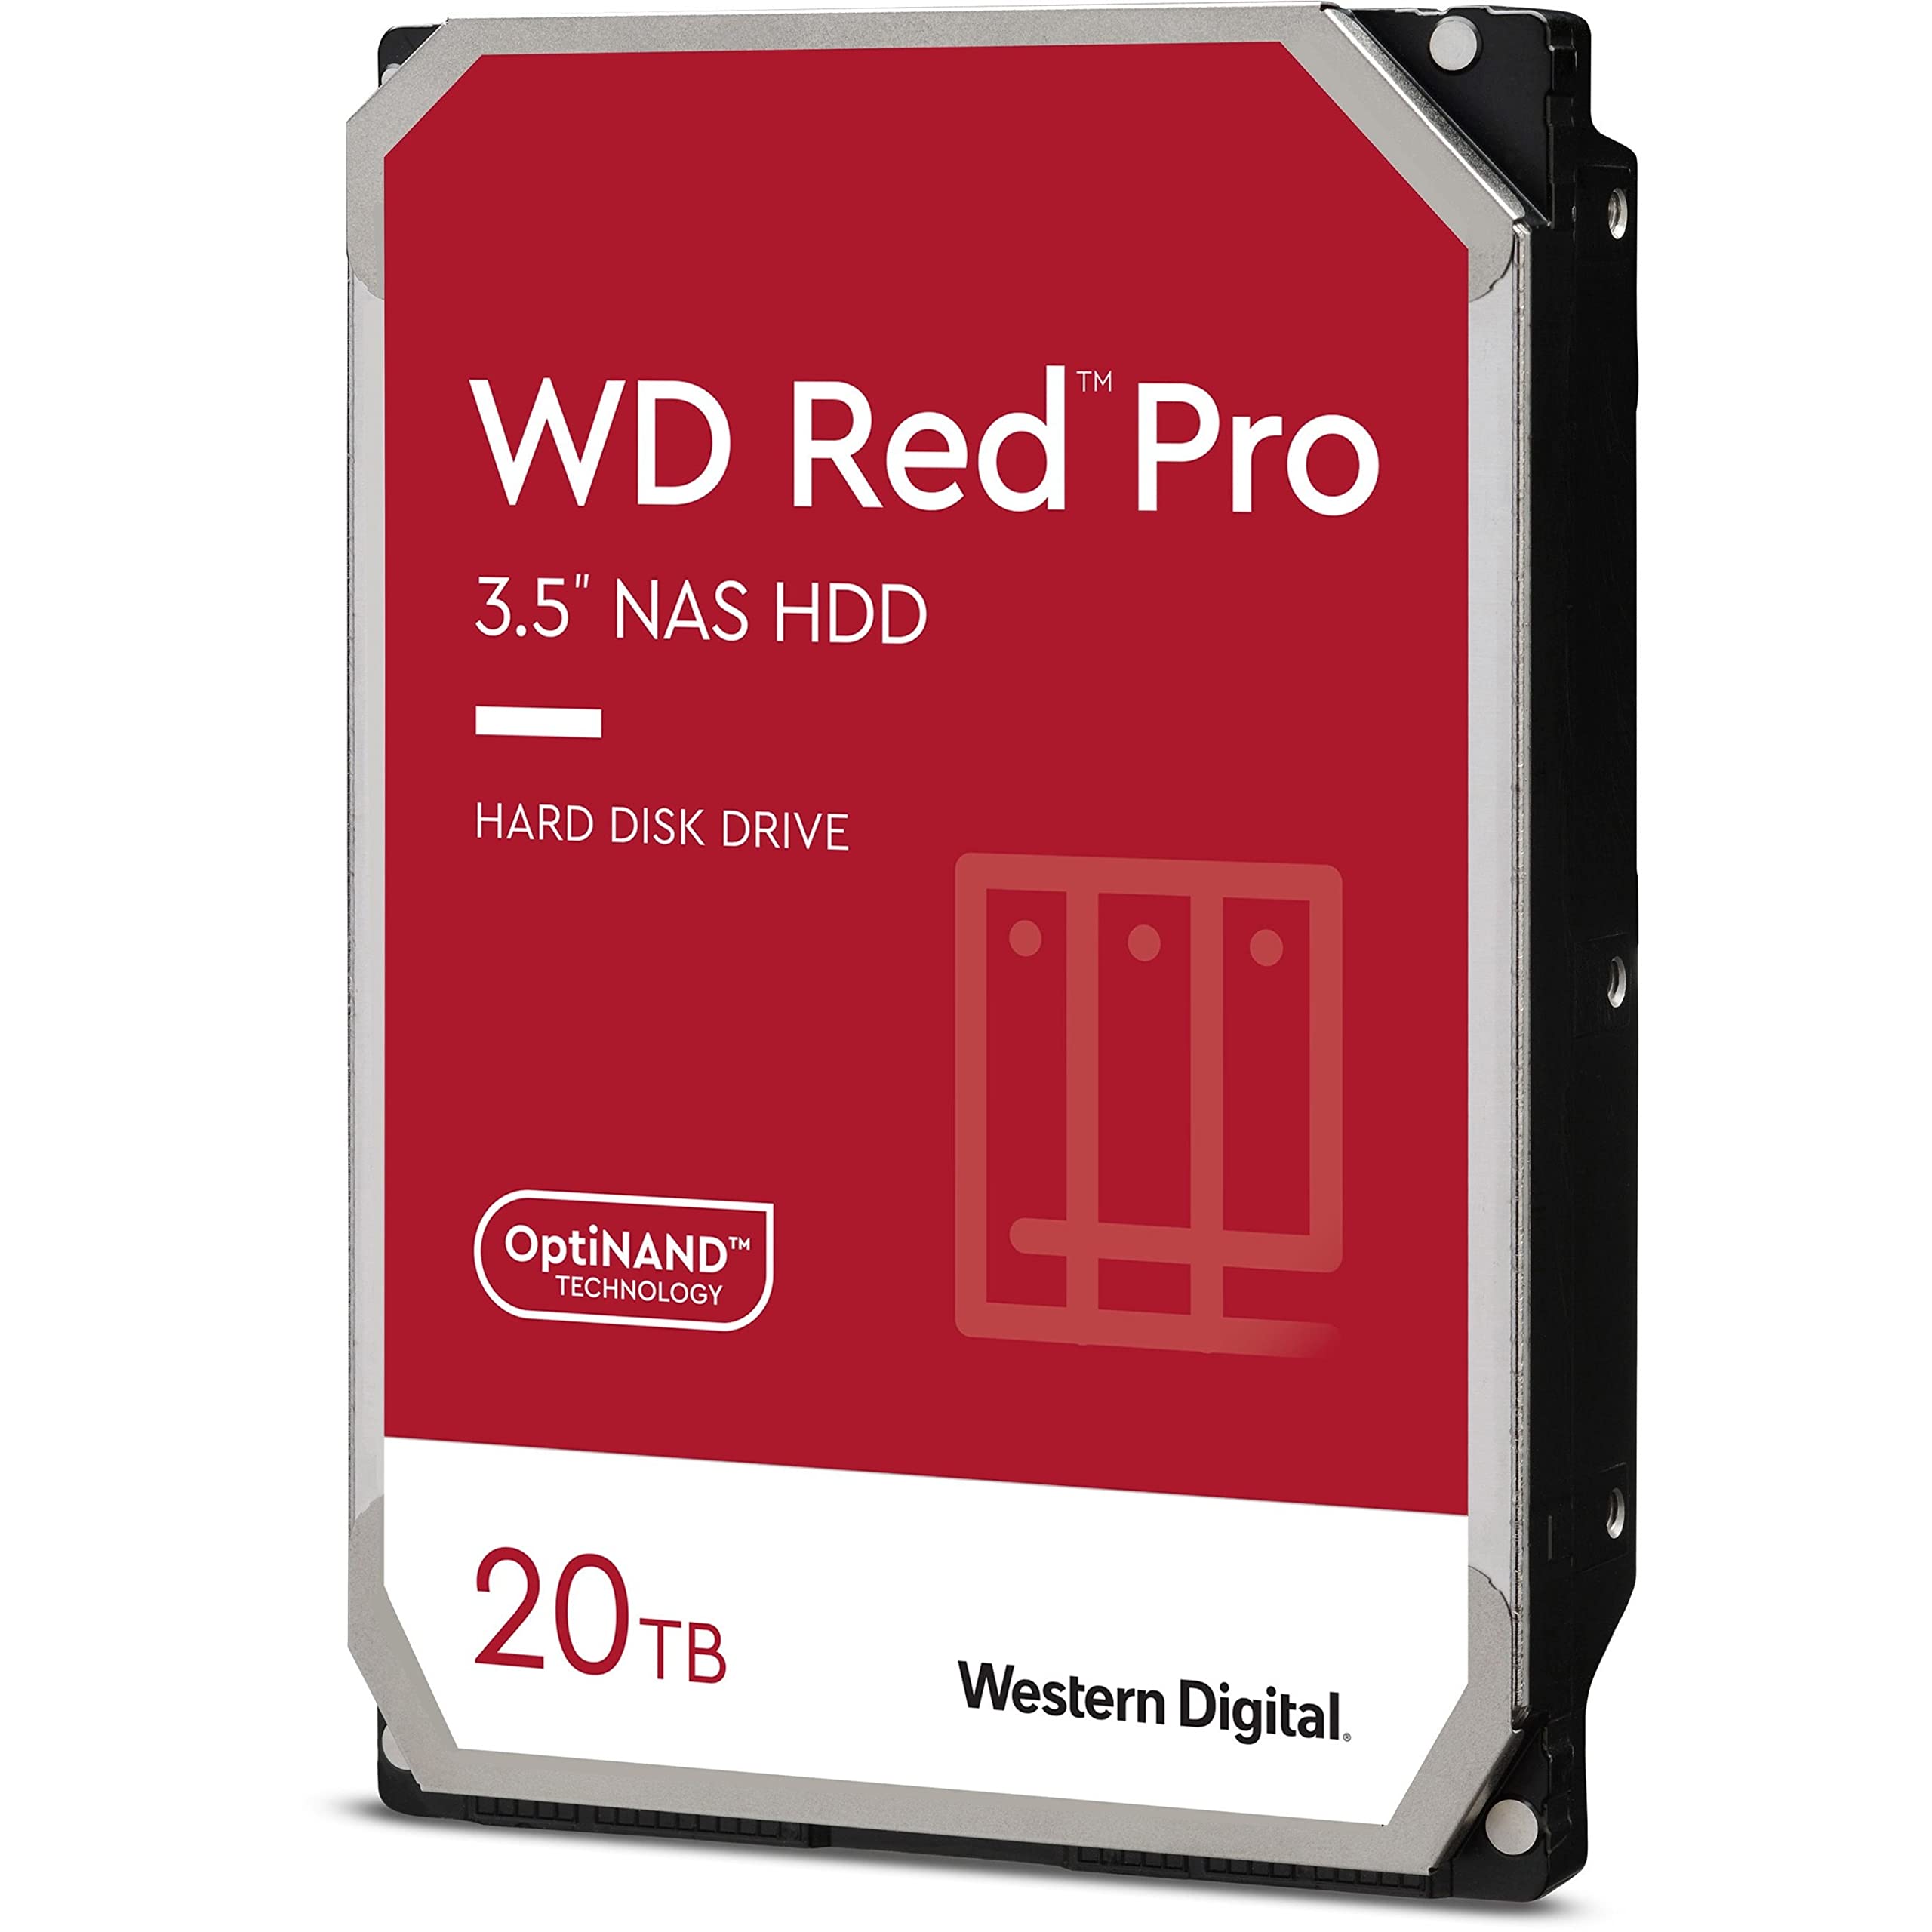 20 TB WD Red Pro for $329.99 at Newegg